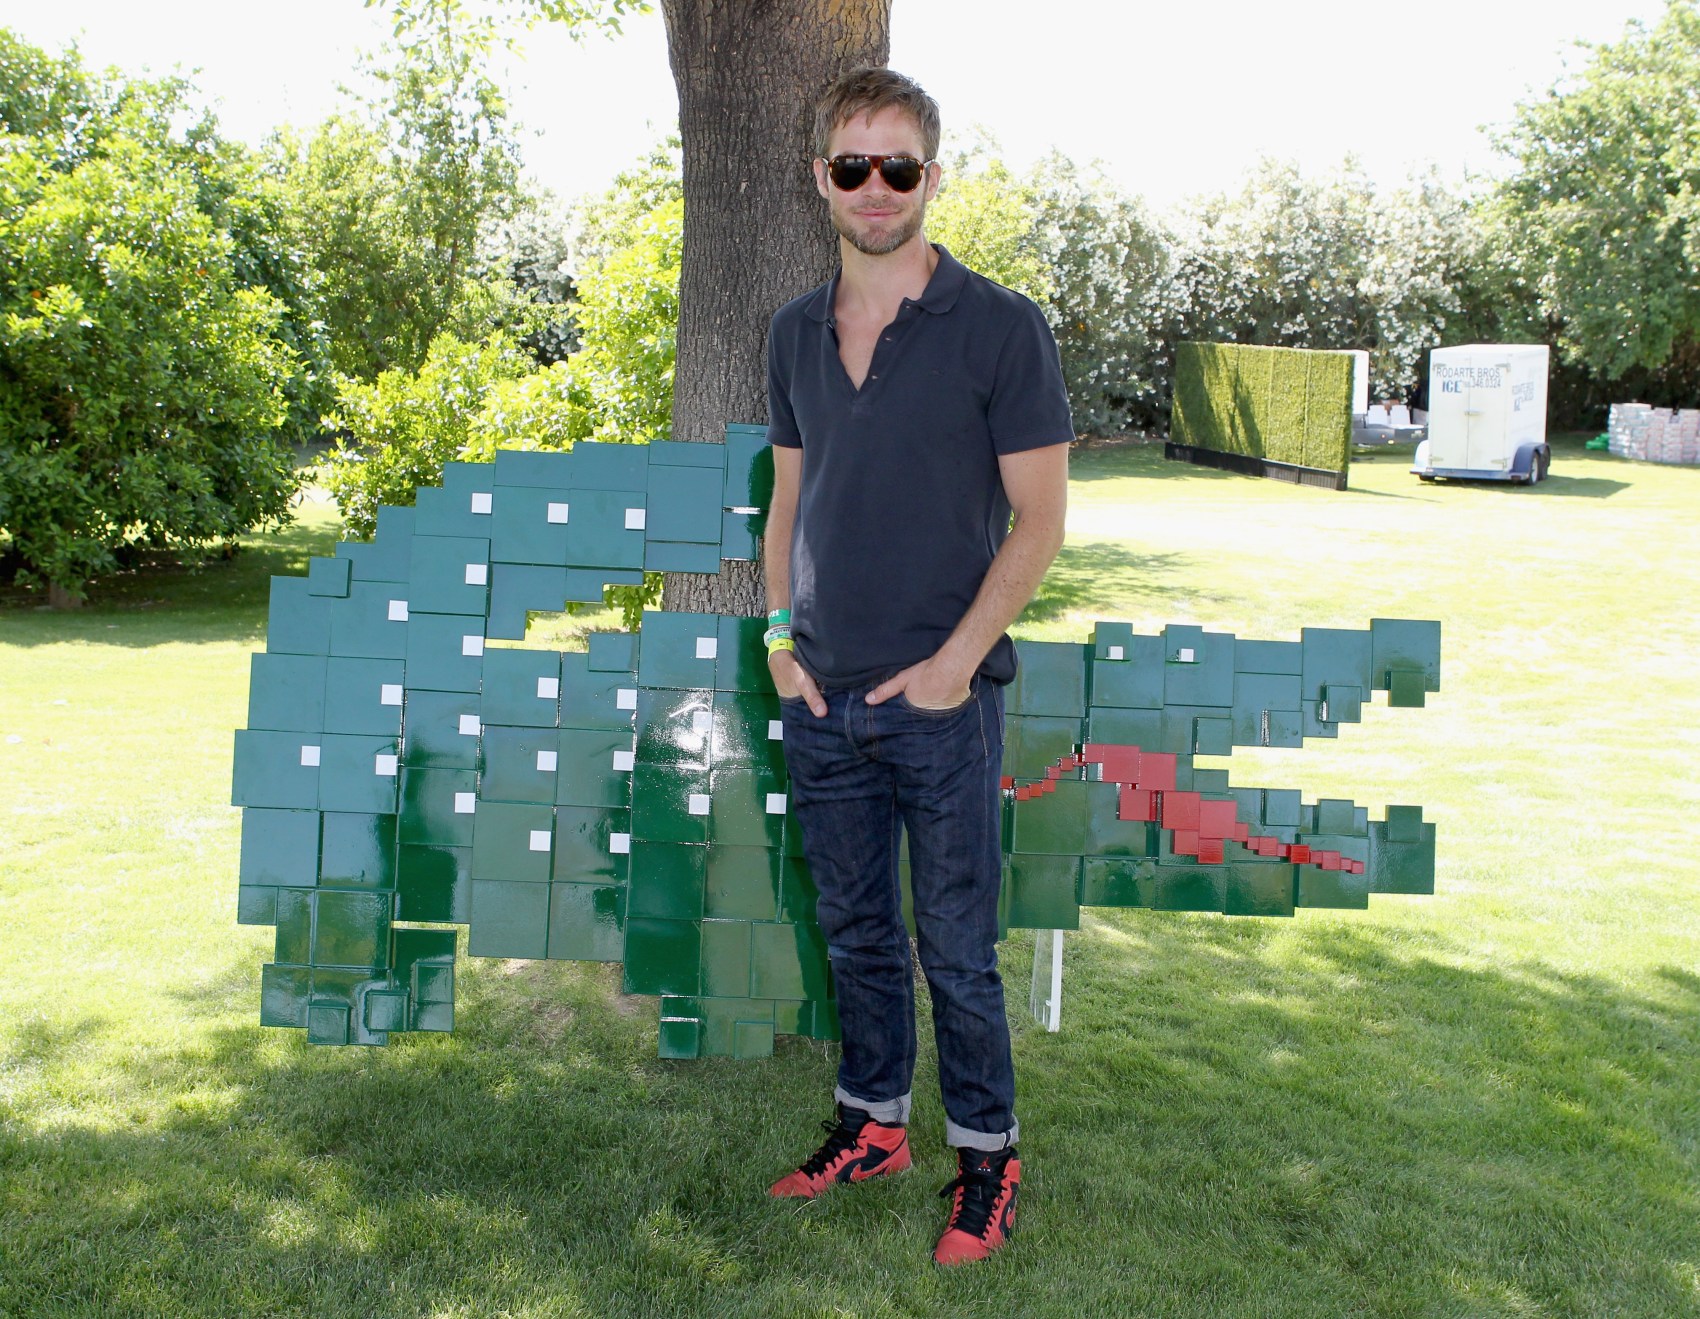 LACOSTE L!VE 4th Annual Desert Pool Party - Day 1